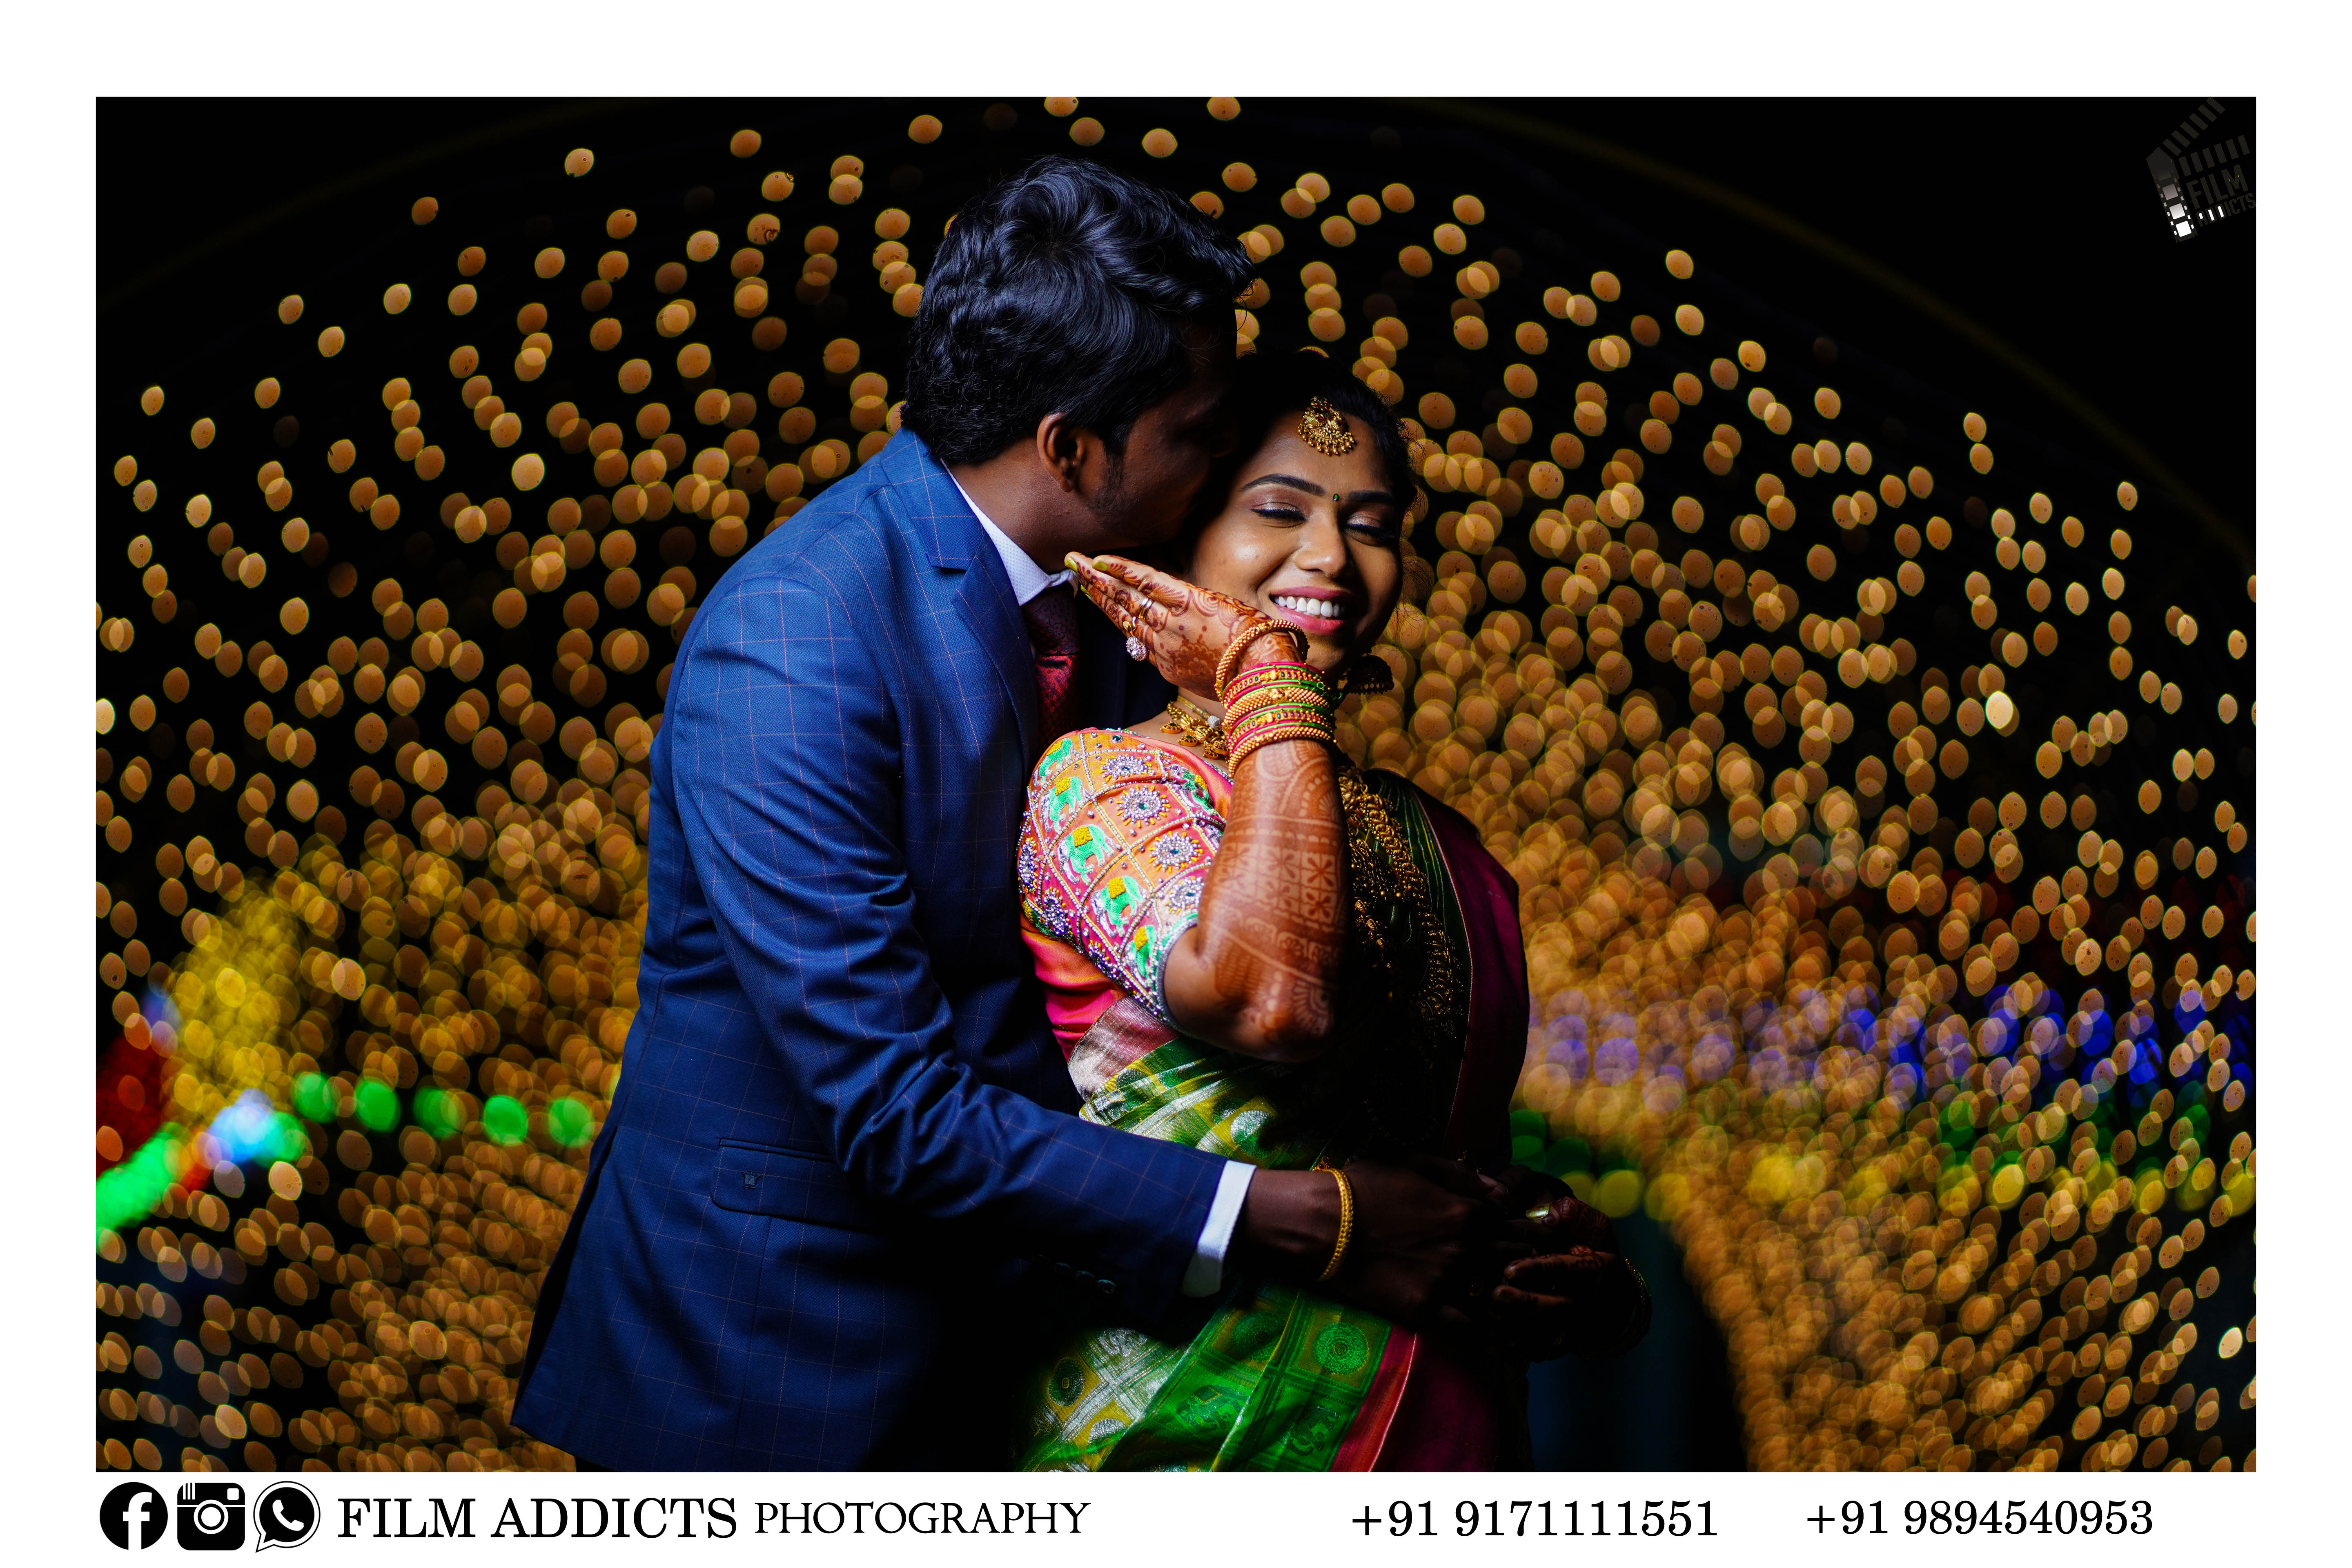 Proffesional Wedding Photographers in Theni-FilmAddicts Photography,best marraige photographers in Theni, best marraige photography in Theni, best candid photography, best Theni photography, Theni,Theni Wedding Planners, Best Wedding Planners in Theni,Wedding Planners in Theni, Best Wedding Photographers in Theni-FilmAddicts Photography, Best candid photographers in Theni, Best Wedding Candid photographers in Theni, Wedding Candid Moments, FilmAddicts, Photography, FilmAddictsPhotography, best wedding in Theni, Best Candid shoot in Theni, best moment, Best wedding moments, Best wedding photography in Theni, Best wedding videography in Theni, Best couple shoot, Best candid, Best wedding shoot, Best wedding candid, Theni photography, Theni couples, candid shoot, candid, tamilnadu wedding photography, best photographers in Theni, tamilnadu